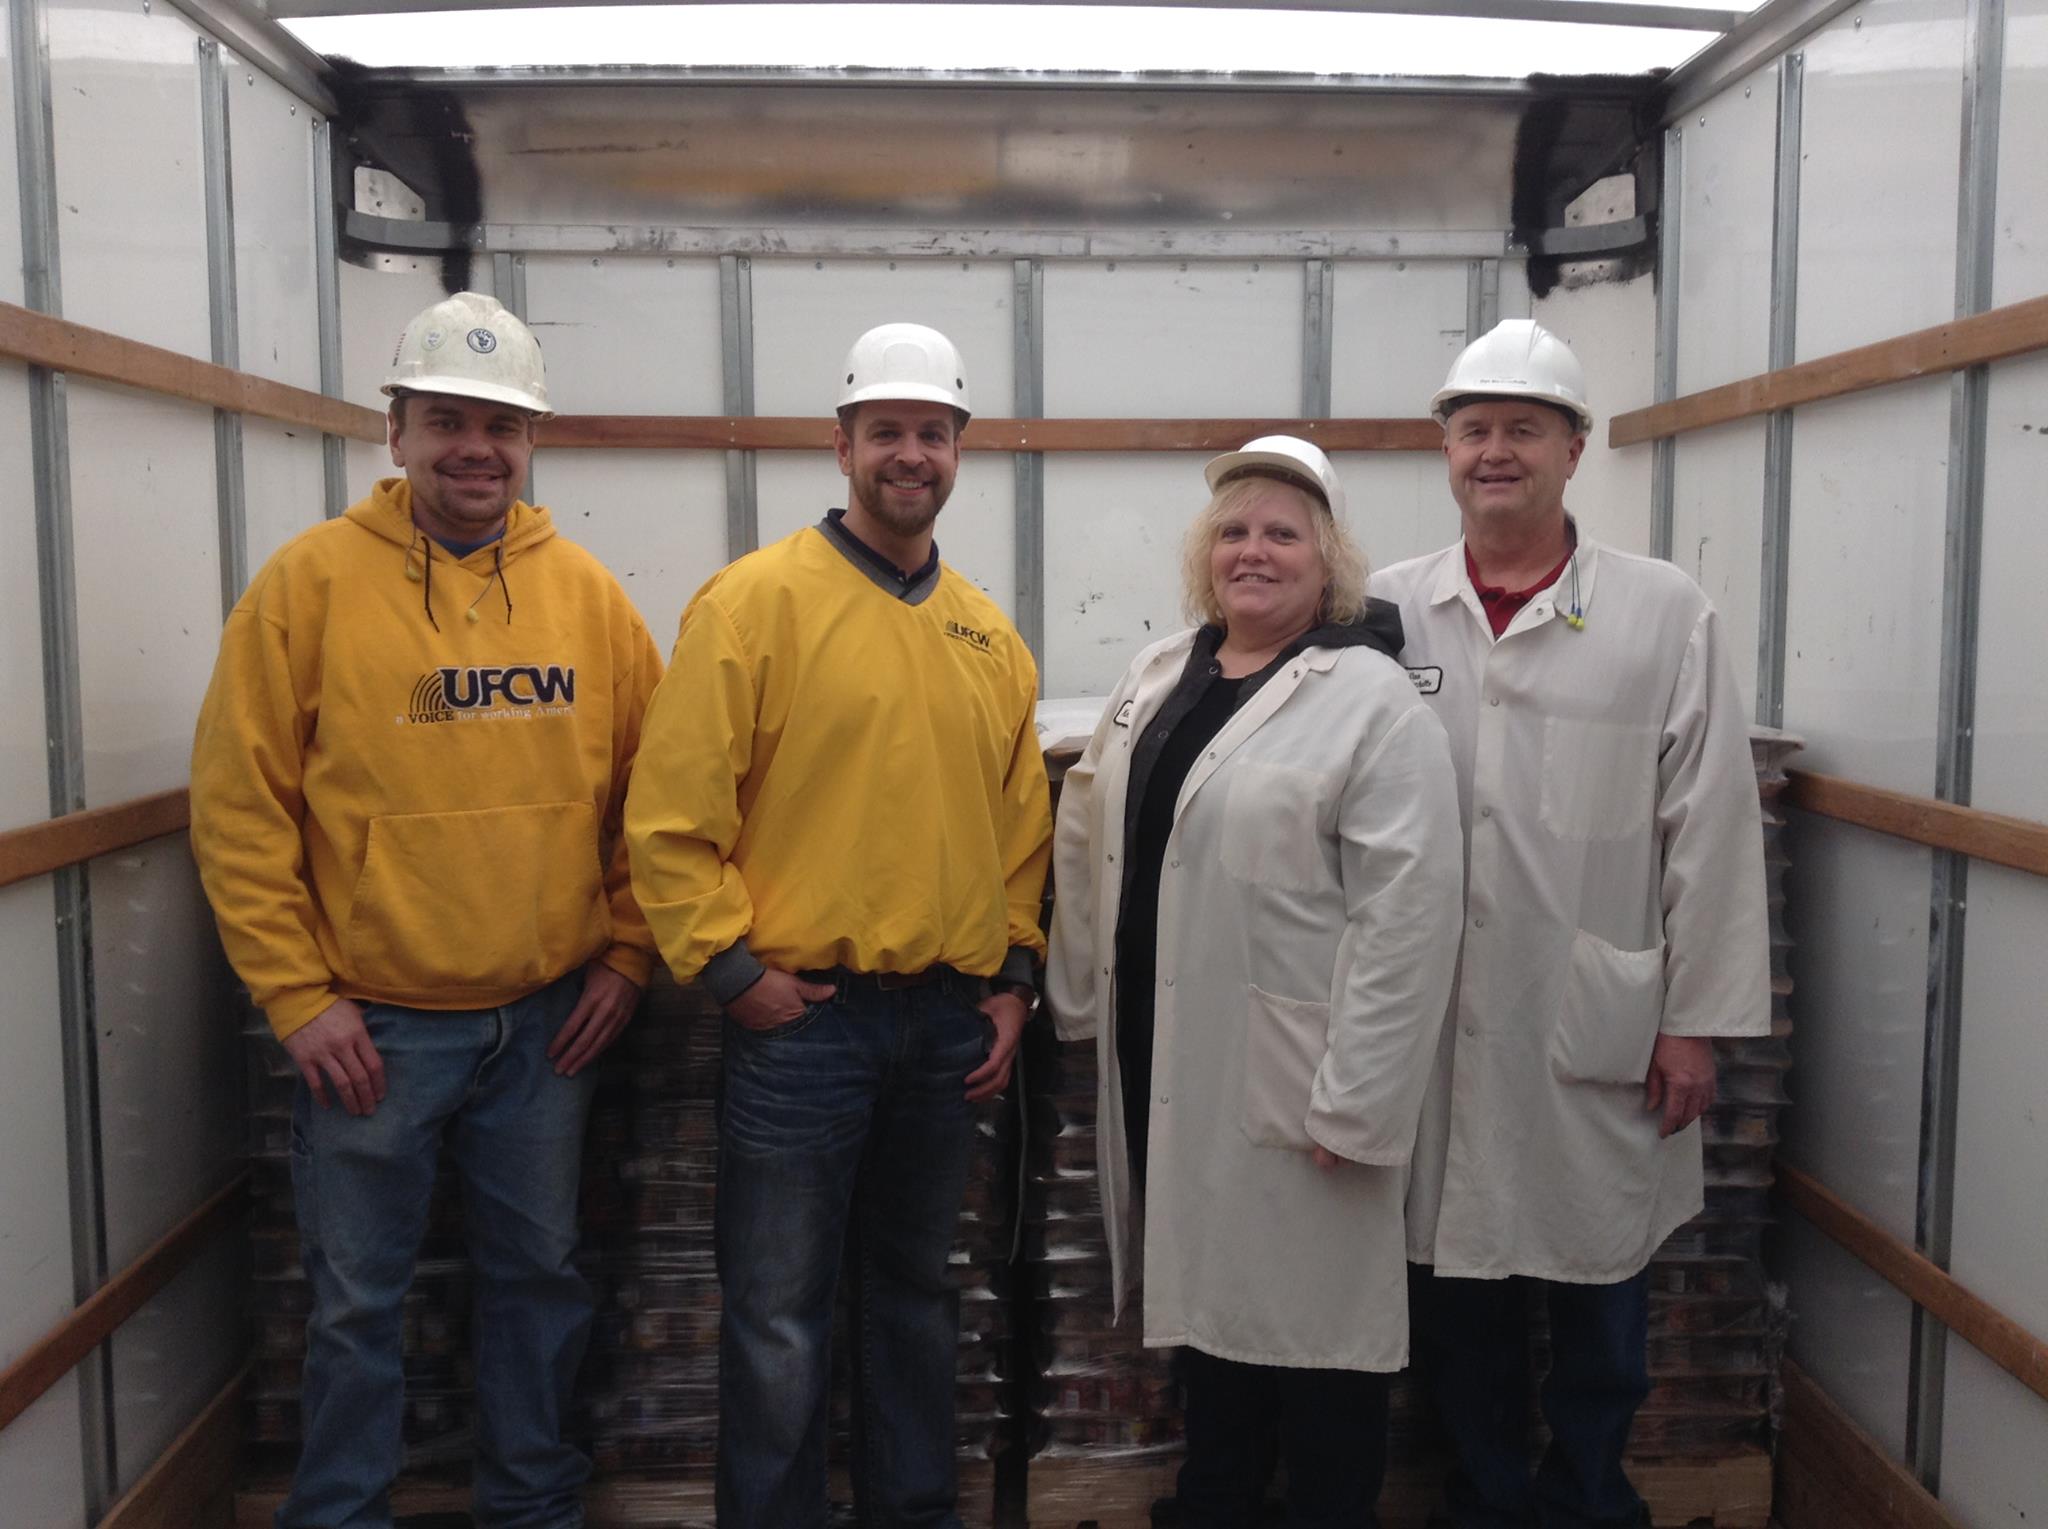 Members of Local 617 who proudly process the products made at the Fort Madison Iowa Plant